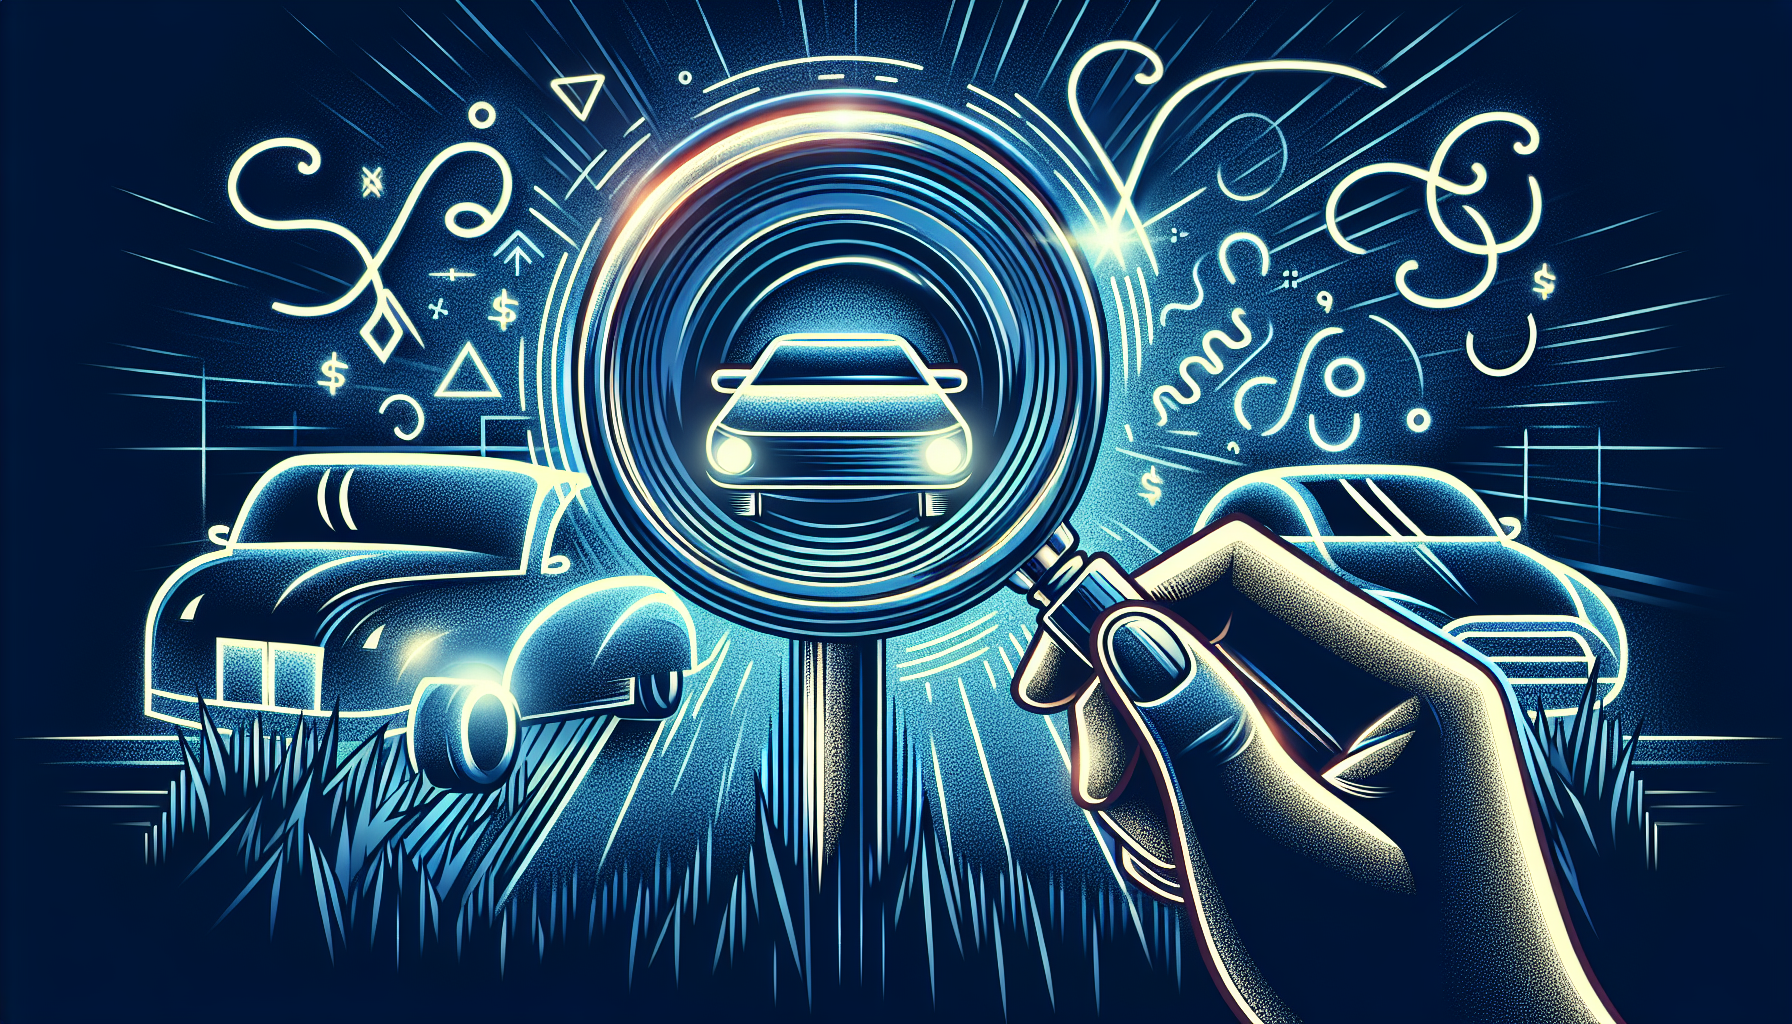 Colorful illustration of a magnifying glass over a low-interest rate sign